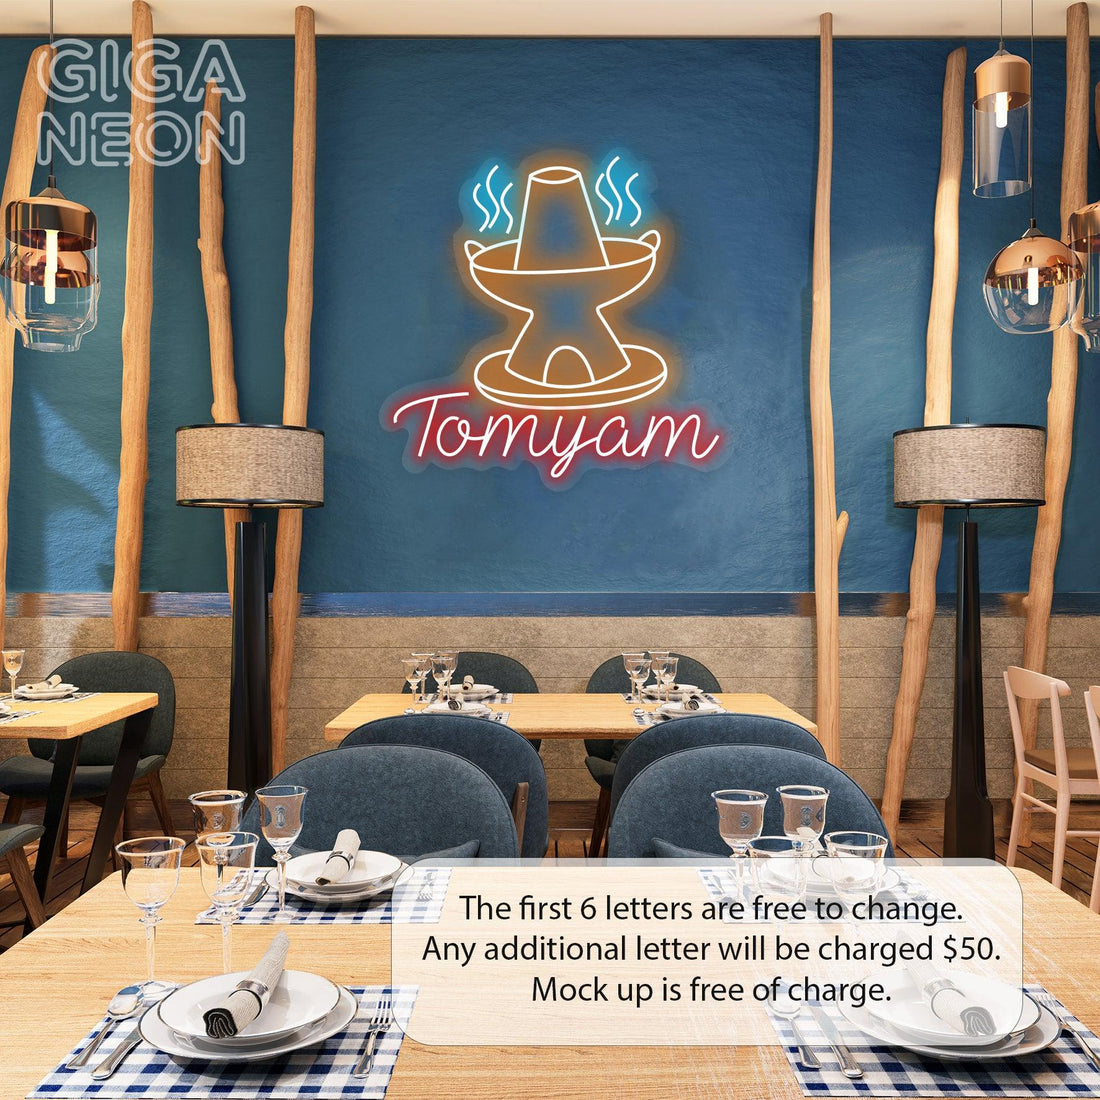 Food-Tom Yum Soup with Text Neon Sign - GIGA NEON